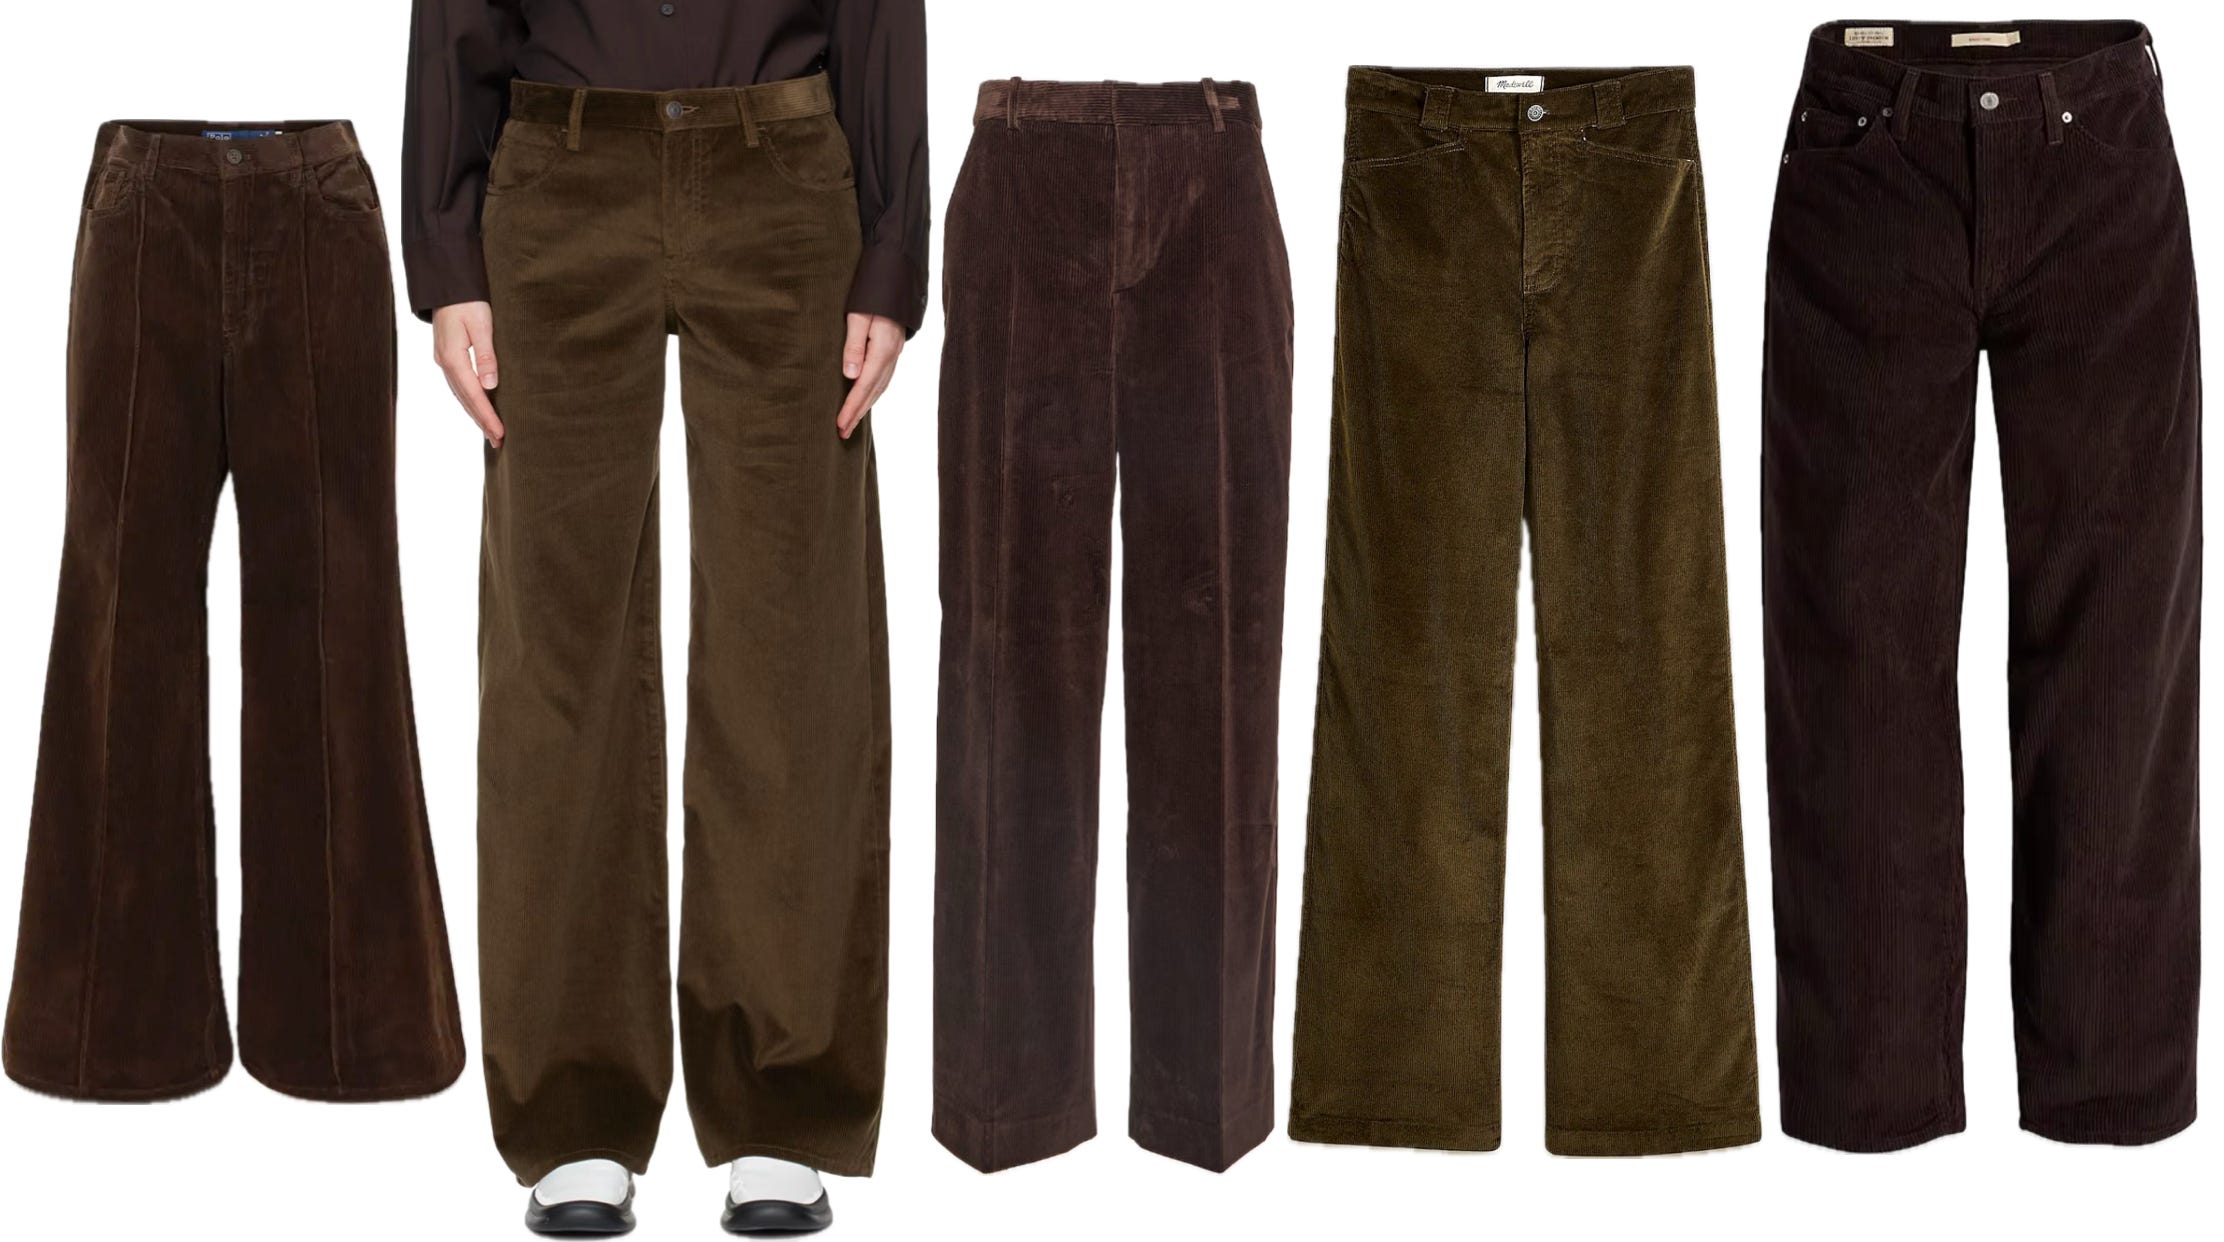 1/2: Brown corduroy pants could be the new jeans